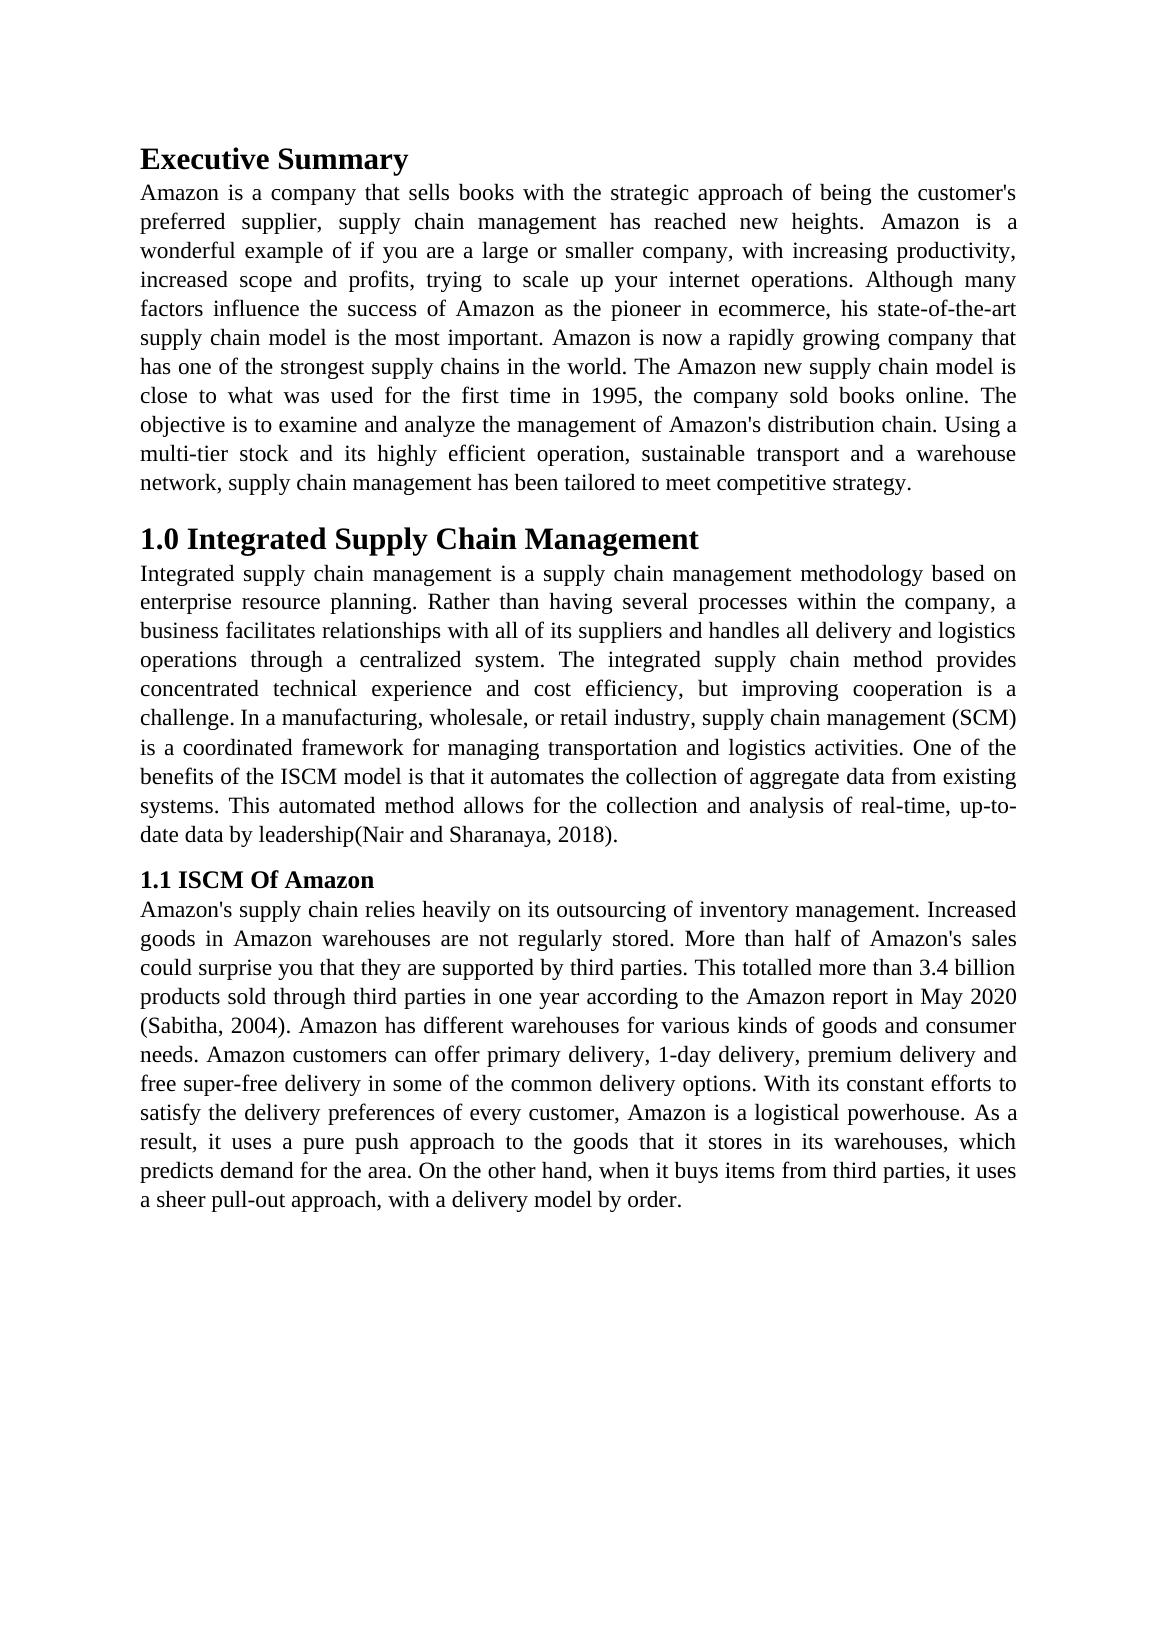 Supply Chain Management on  Amazon  Assignment_2